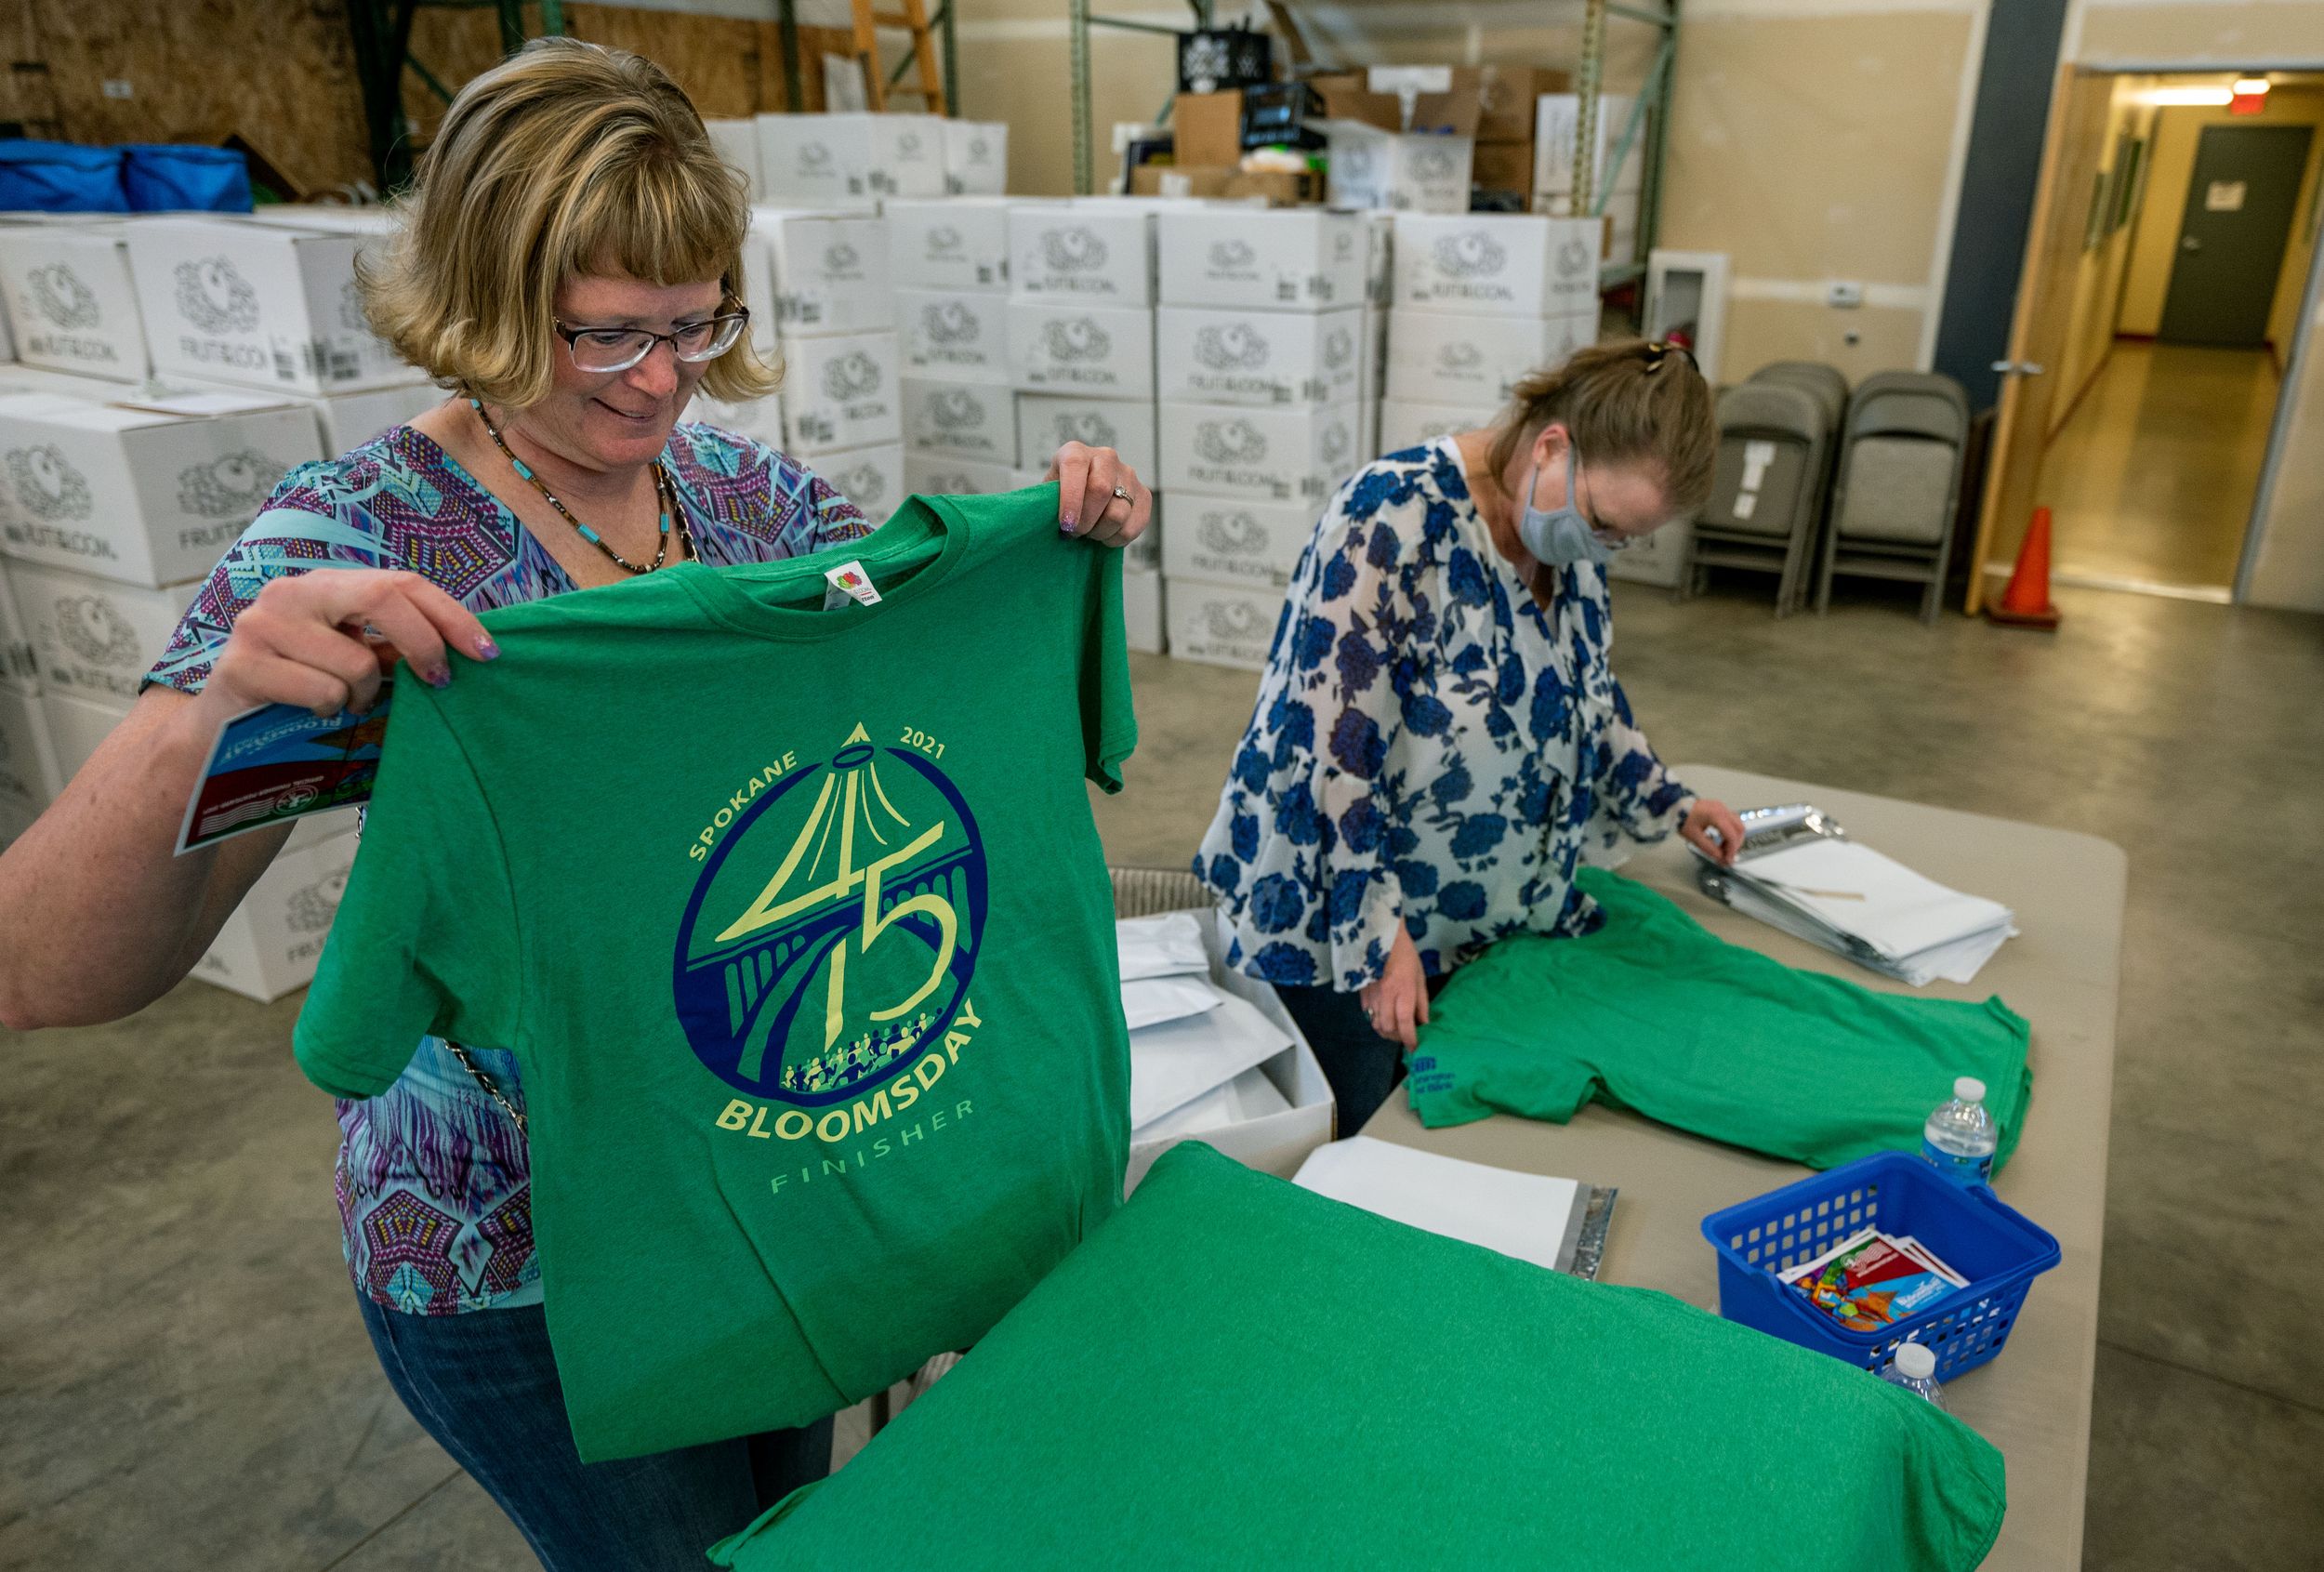 'You call, they're here' Bloomsday volunteers prep finisher Tshirts